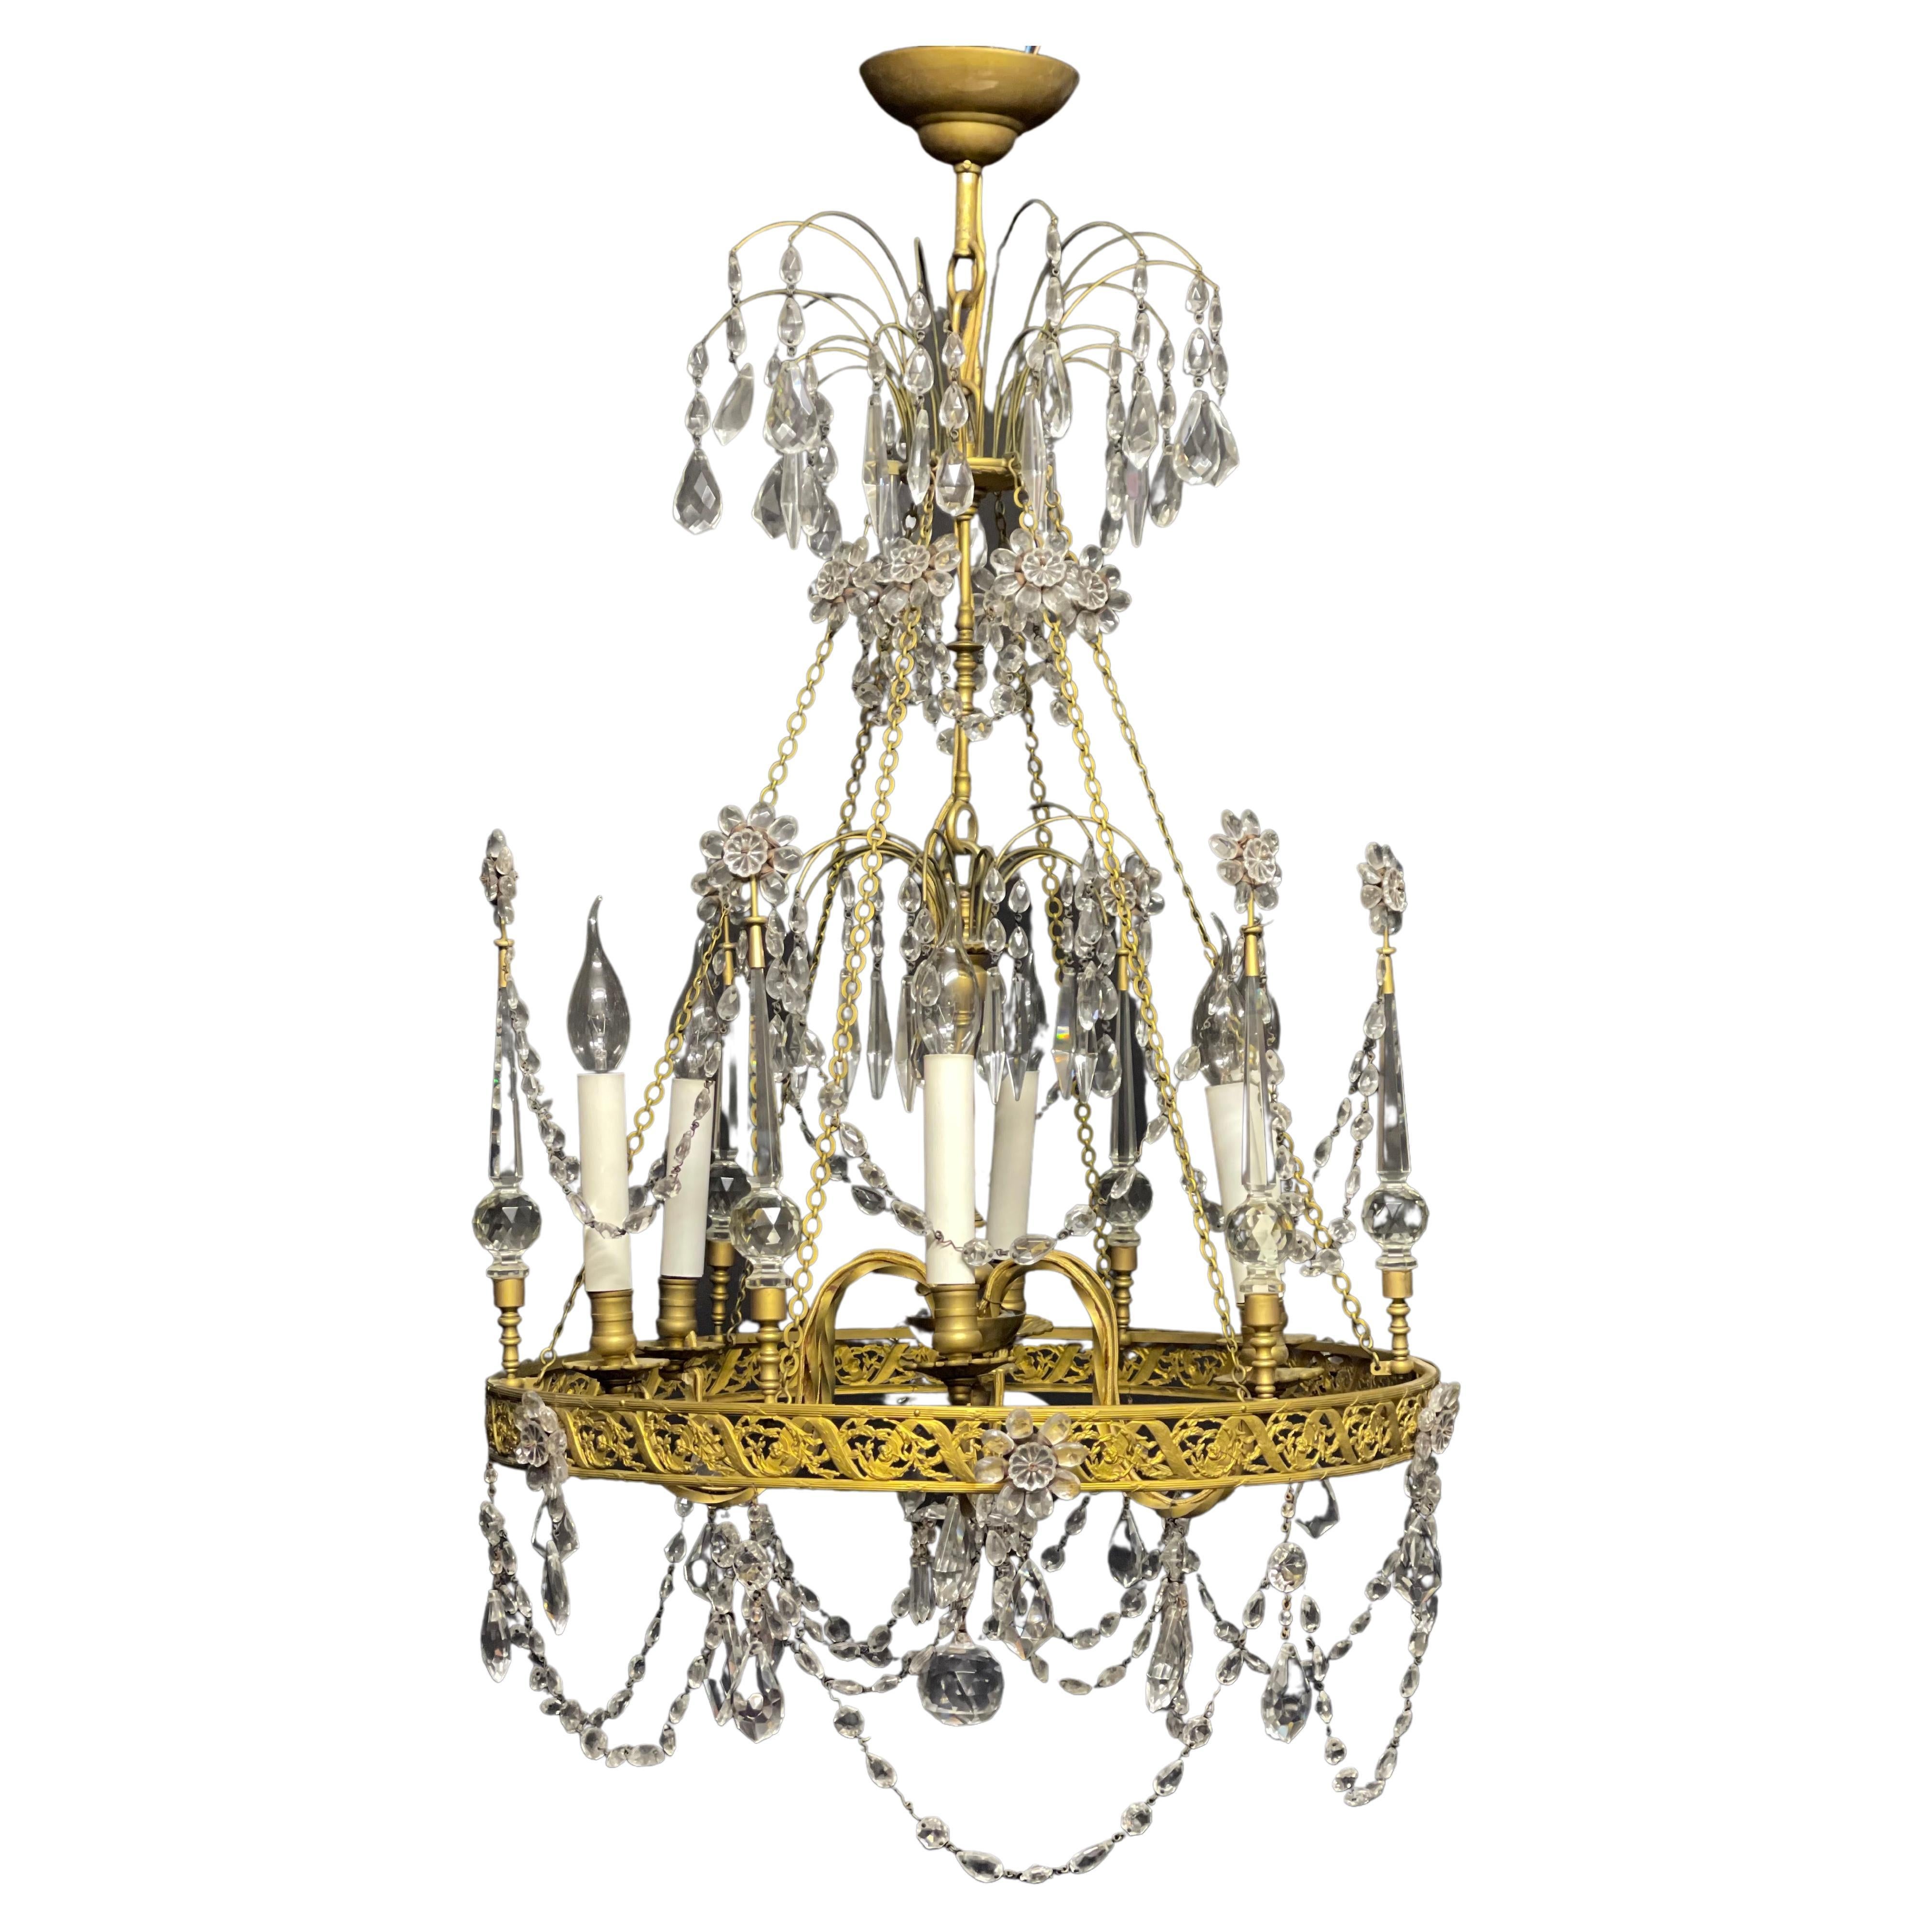 A rare, early chandelier Maison Baguès, Paris, circa 1890s.
This wonderful light fixture is made of bronze and crystal and is very rich in details.
Socket: 6 x e14 for standard screw bulbs.







